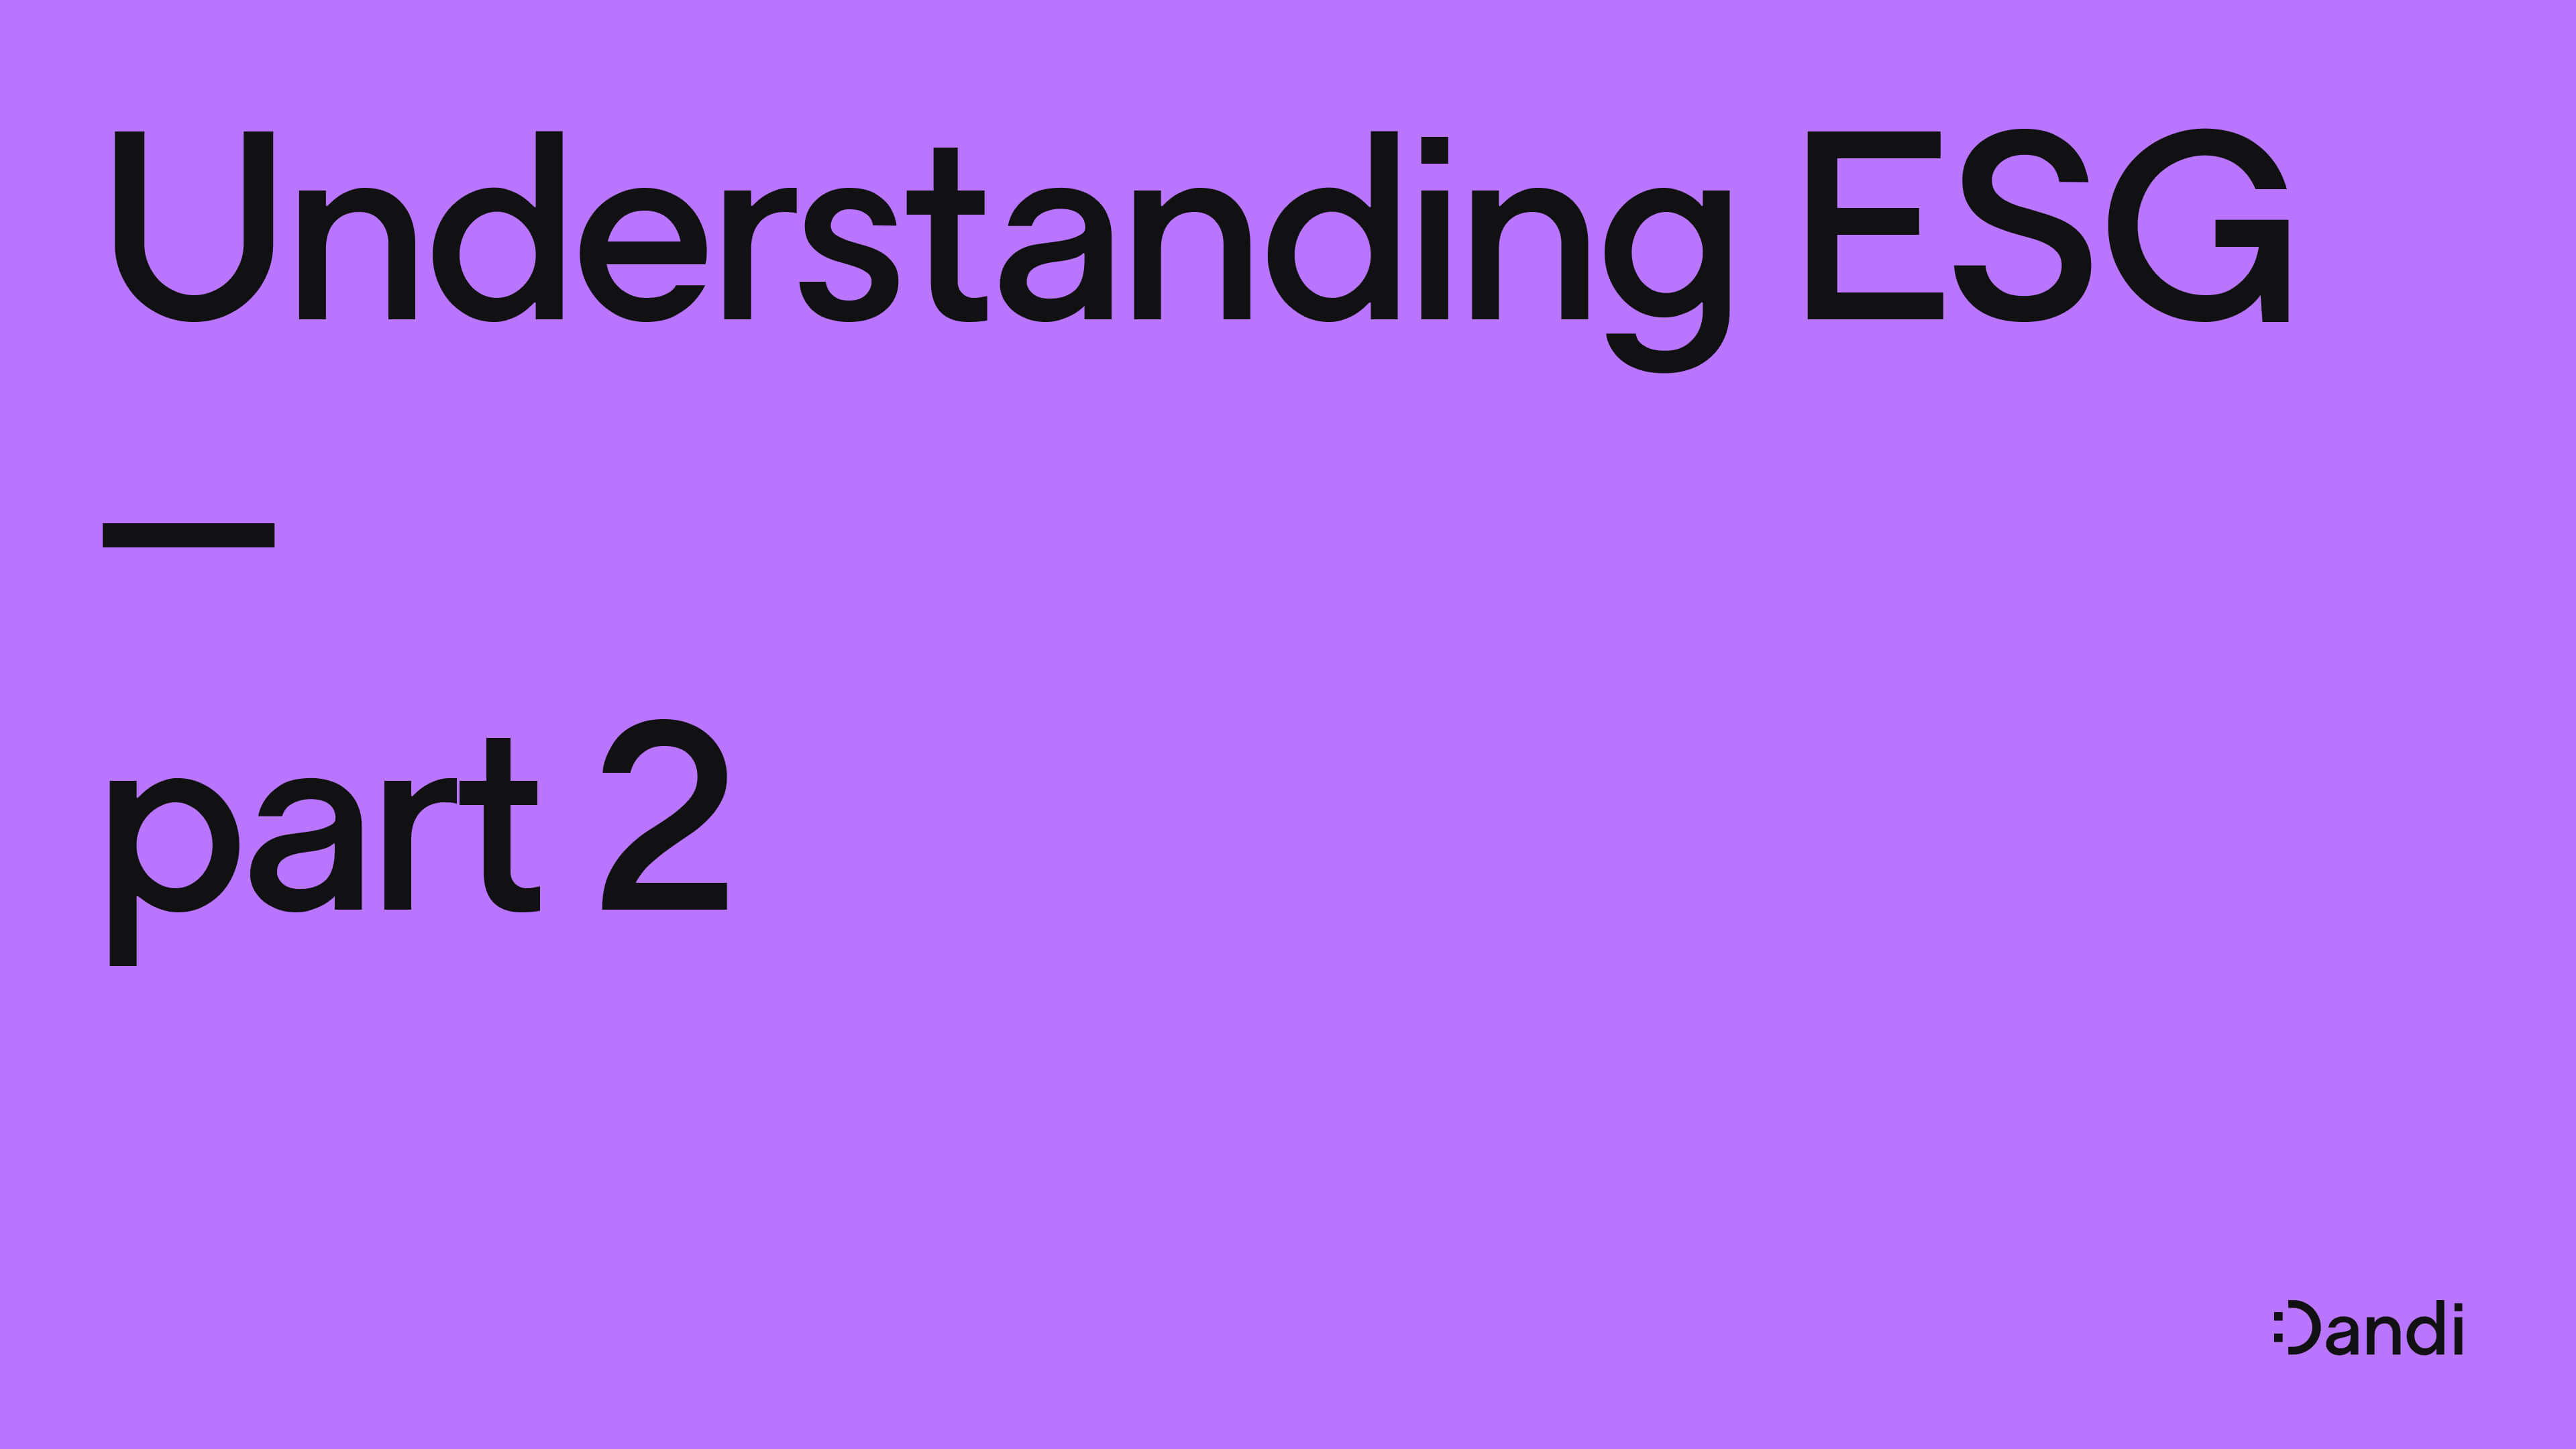 A purple card with black text reading "Understanding ESG part 2"